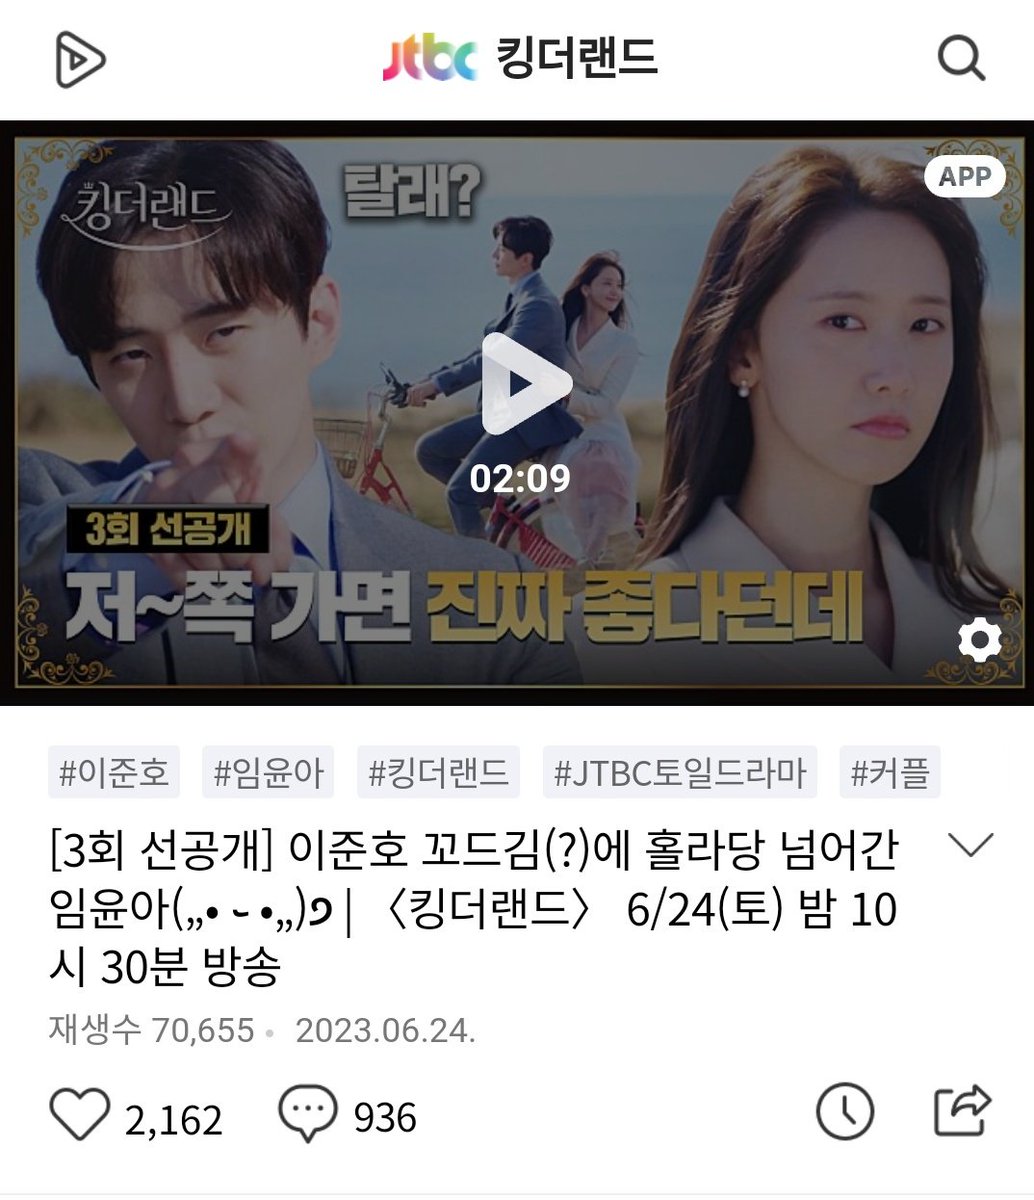 #KingTheLandEp3 pre release clip is on top 1 Naver TV video as of 18.15 pm KST with >70k views >2k ♥️ and almost a thousand comments!🔥

🔗m.tv.naver.com/v/37319544

#Yoona #LimYoonA #Junho #LeeJunHo #윤아 #이준호 #임윤아 #준호